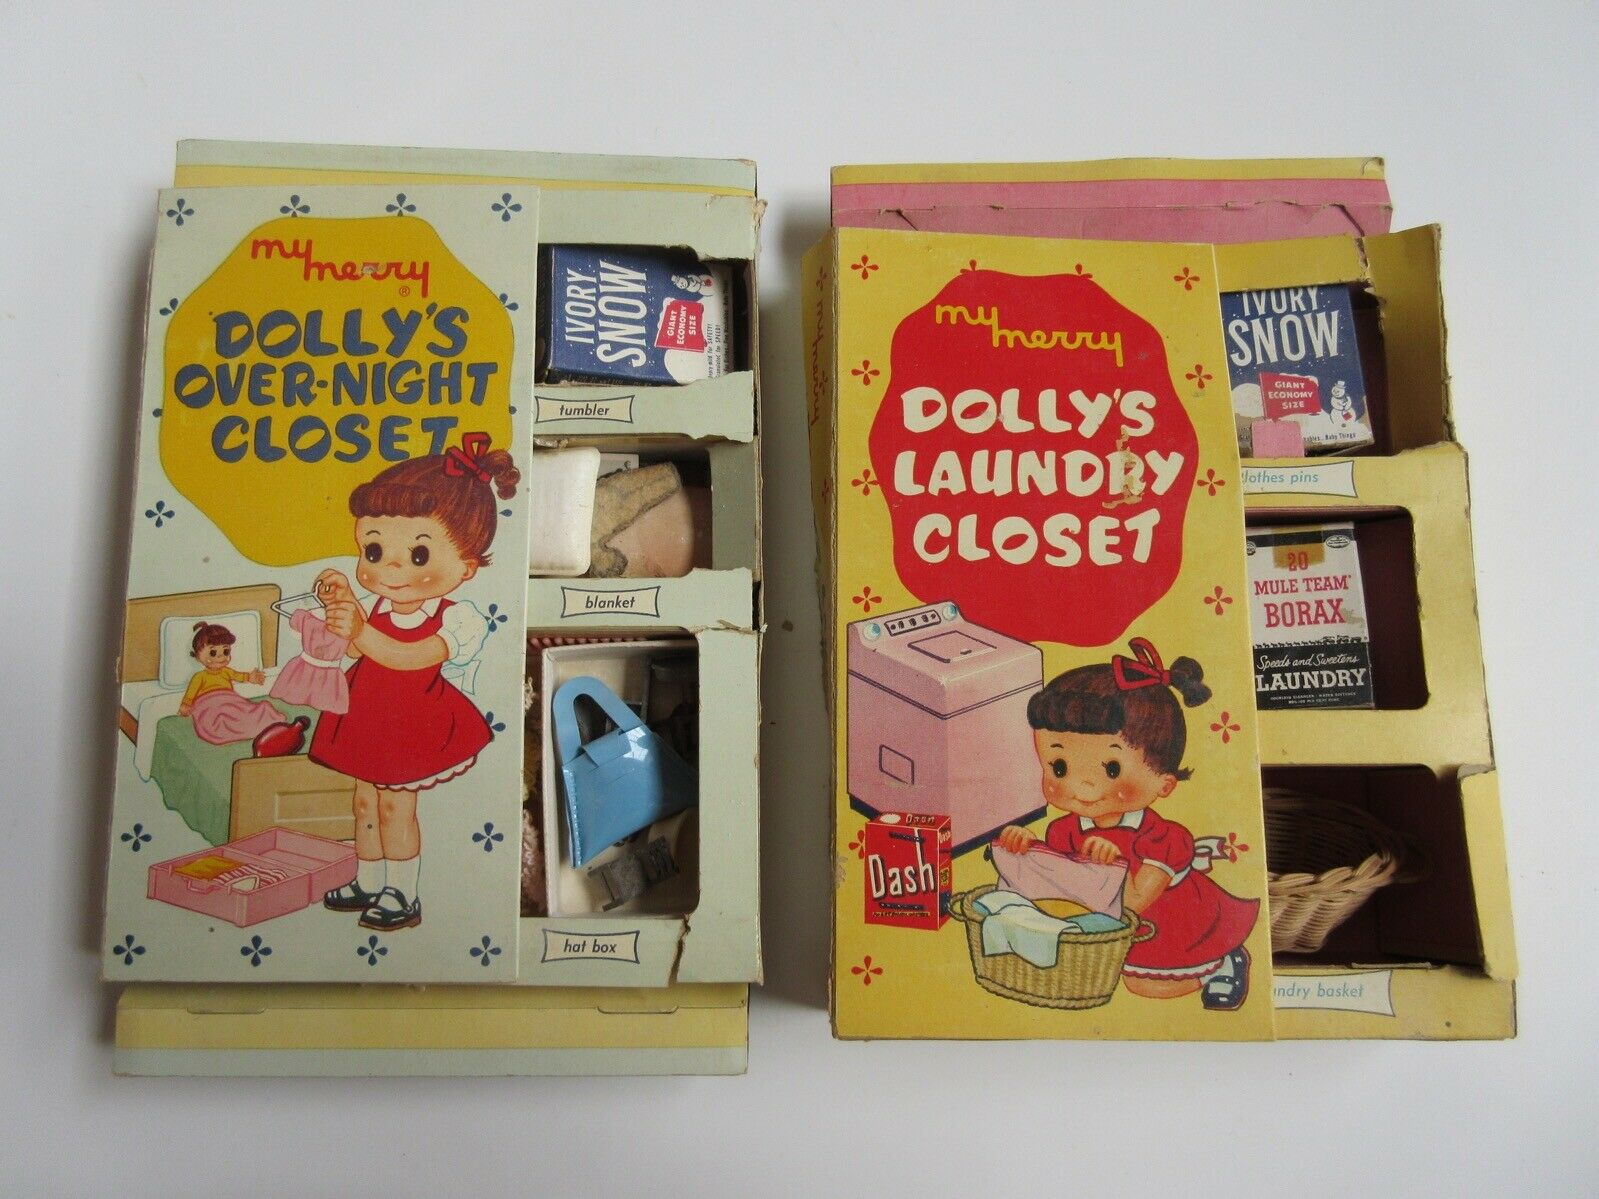 2 Vintage Doll Accessories My Merry Dolly’s Over-night Closet & Laundry Closet